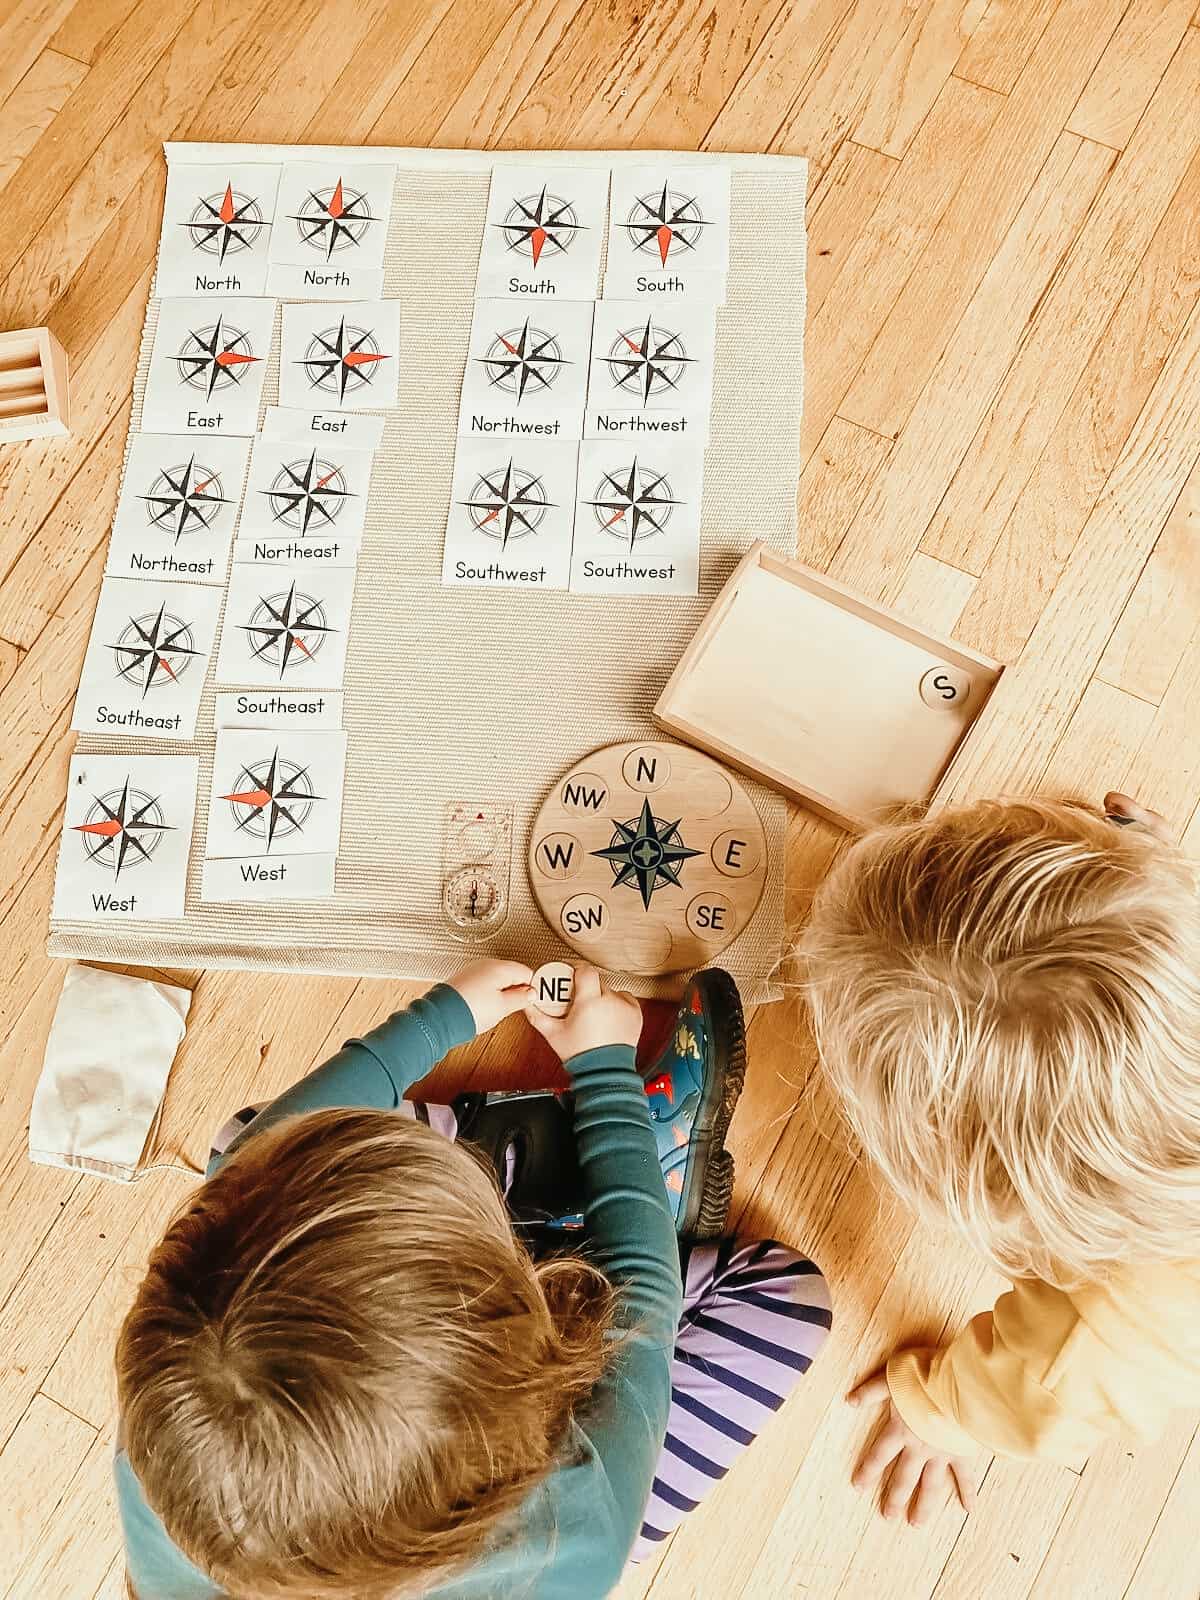 compass rose puzzle and cards lying on a mat next to children